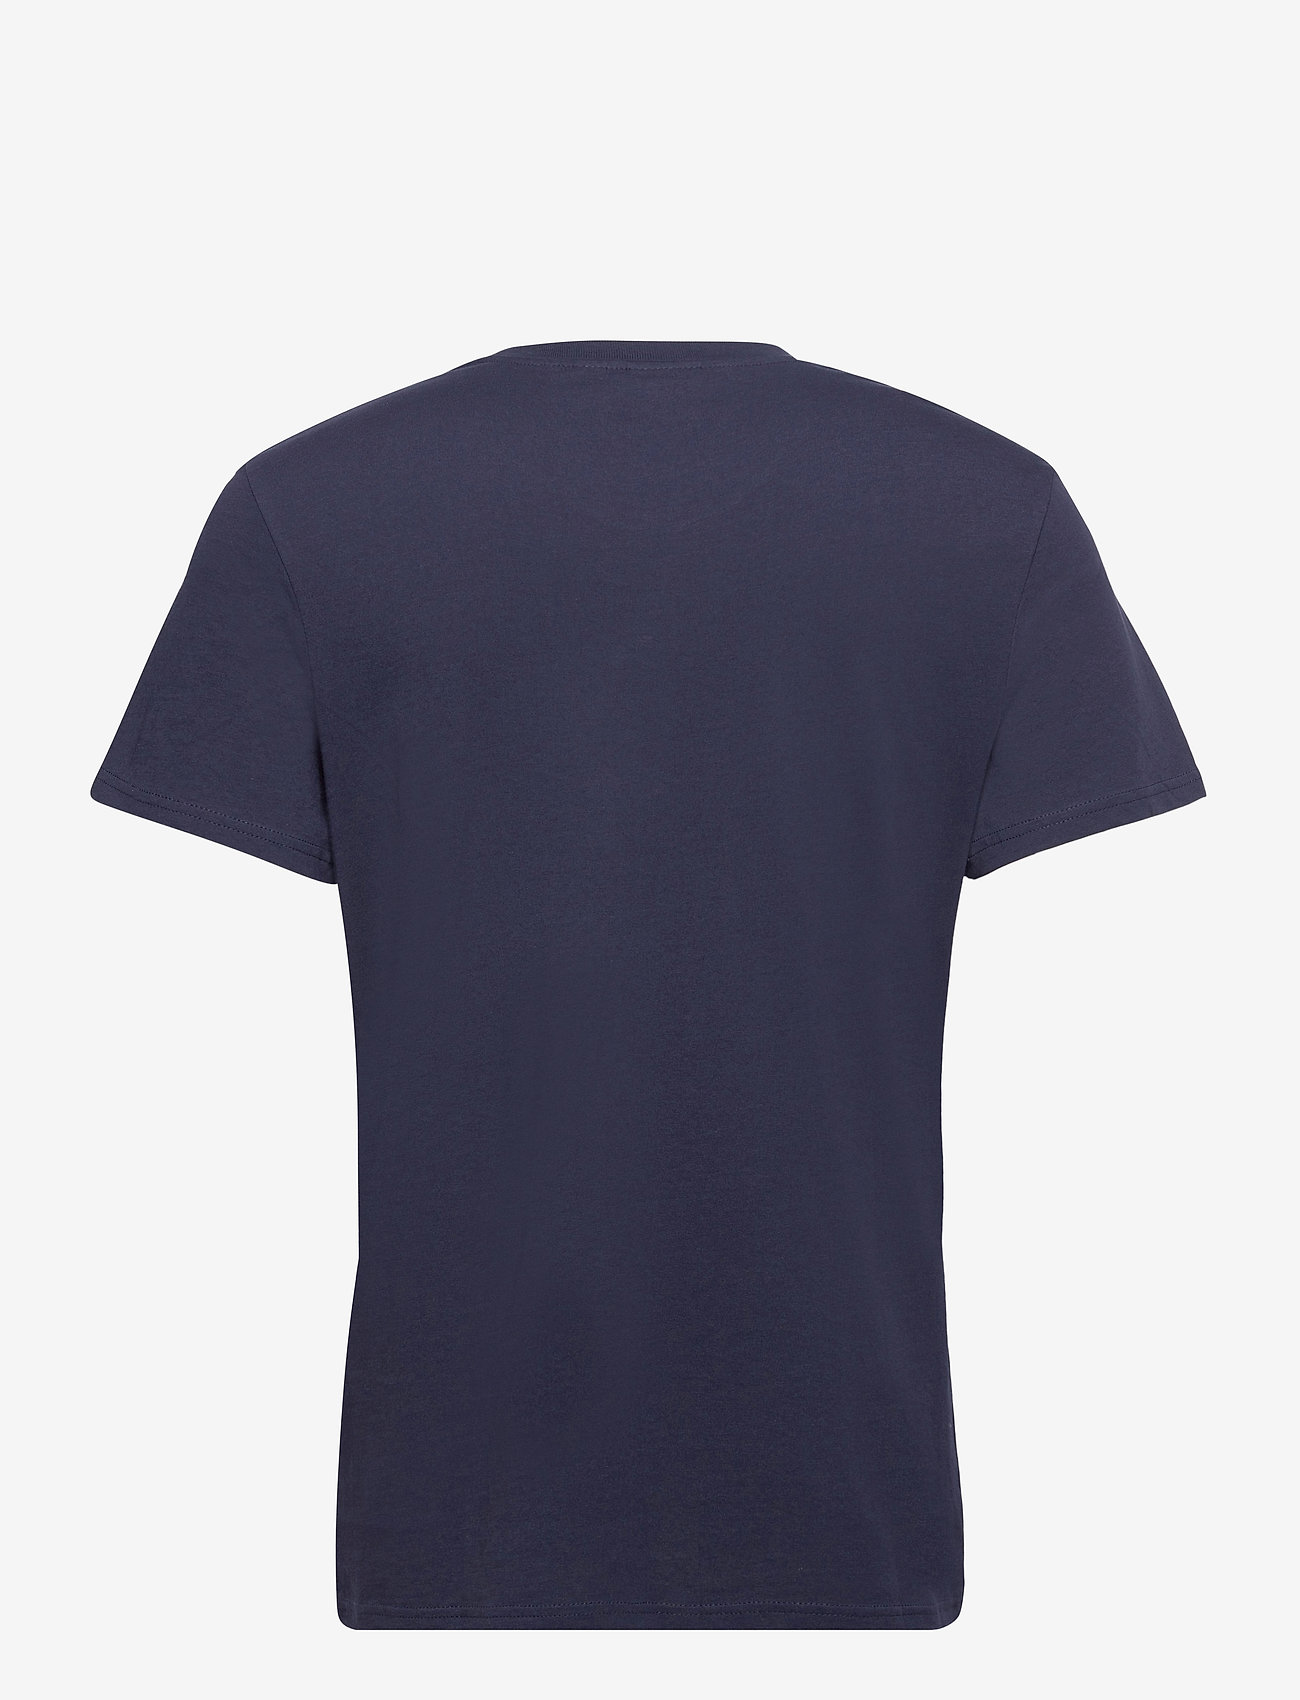 G-Star RAW - Graphic 8 r t s\s - lowest prices - sartho blue - 1